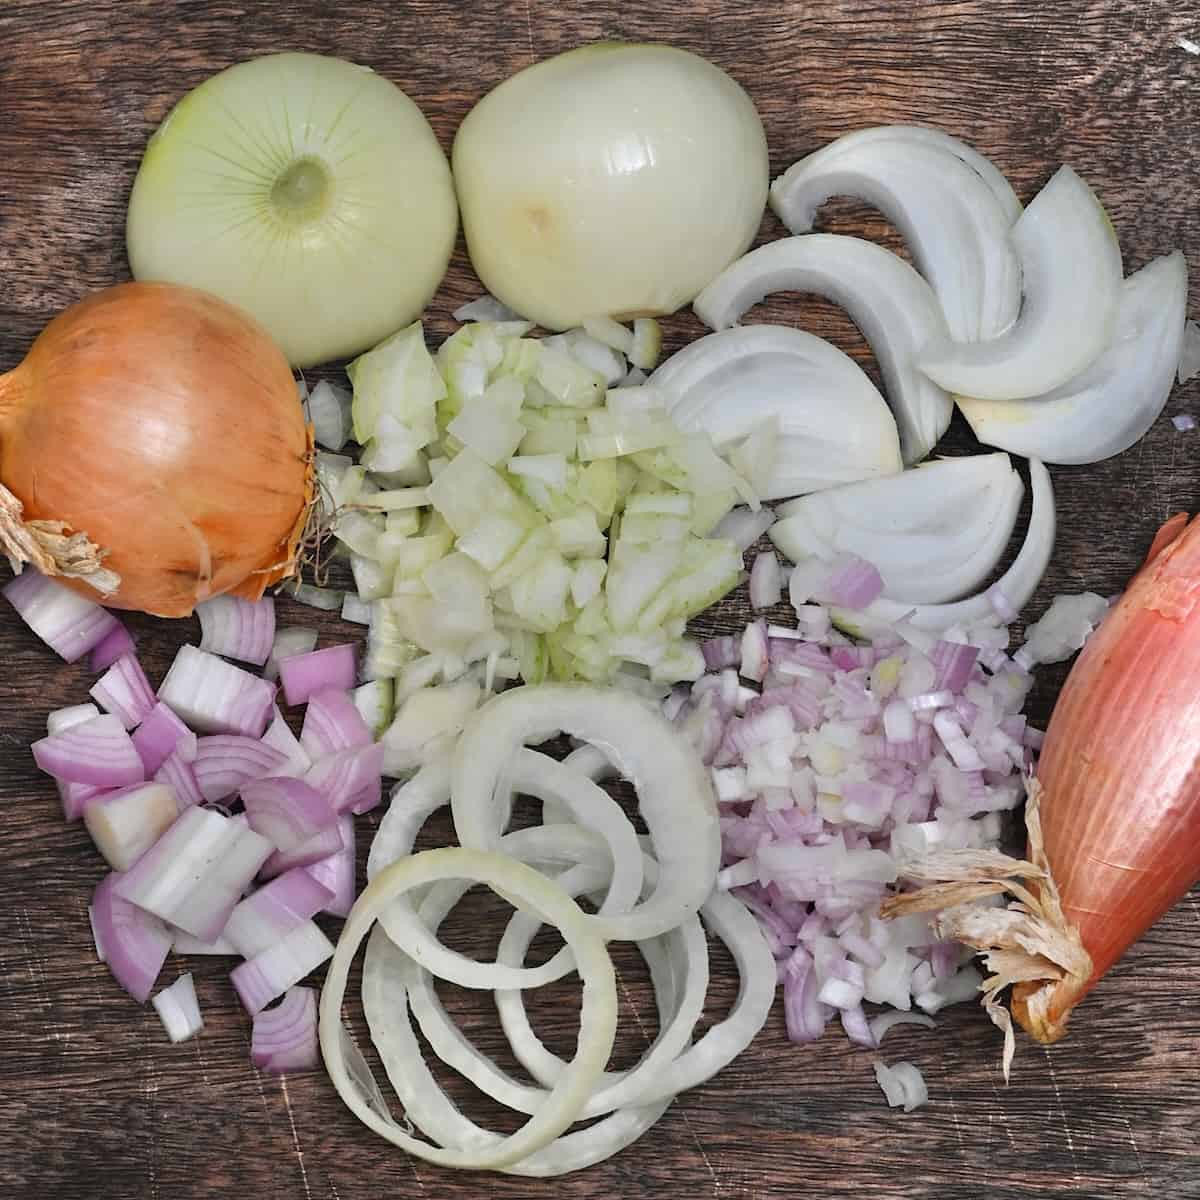 https://www.alphafoodie.com/wp-content/uploads/2022/12/Onion-Guide-square.jpeg